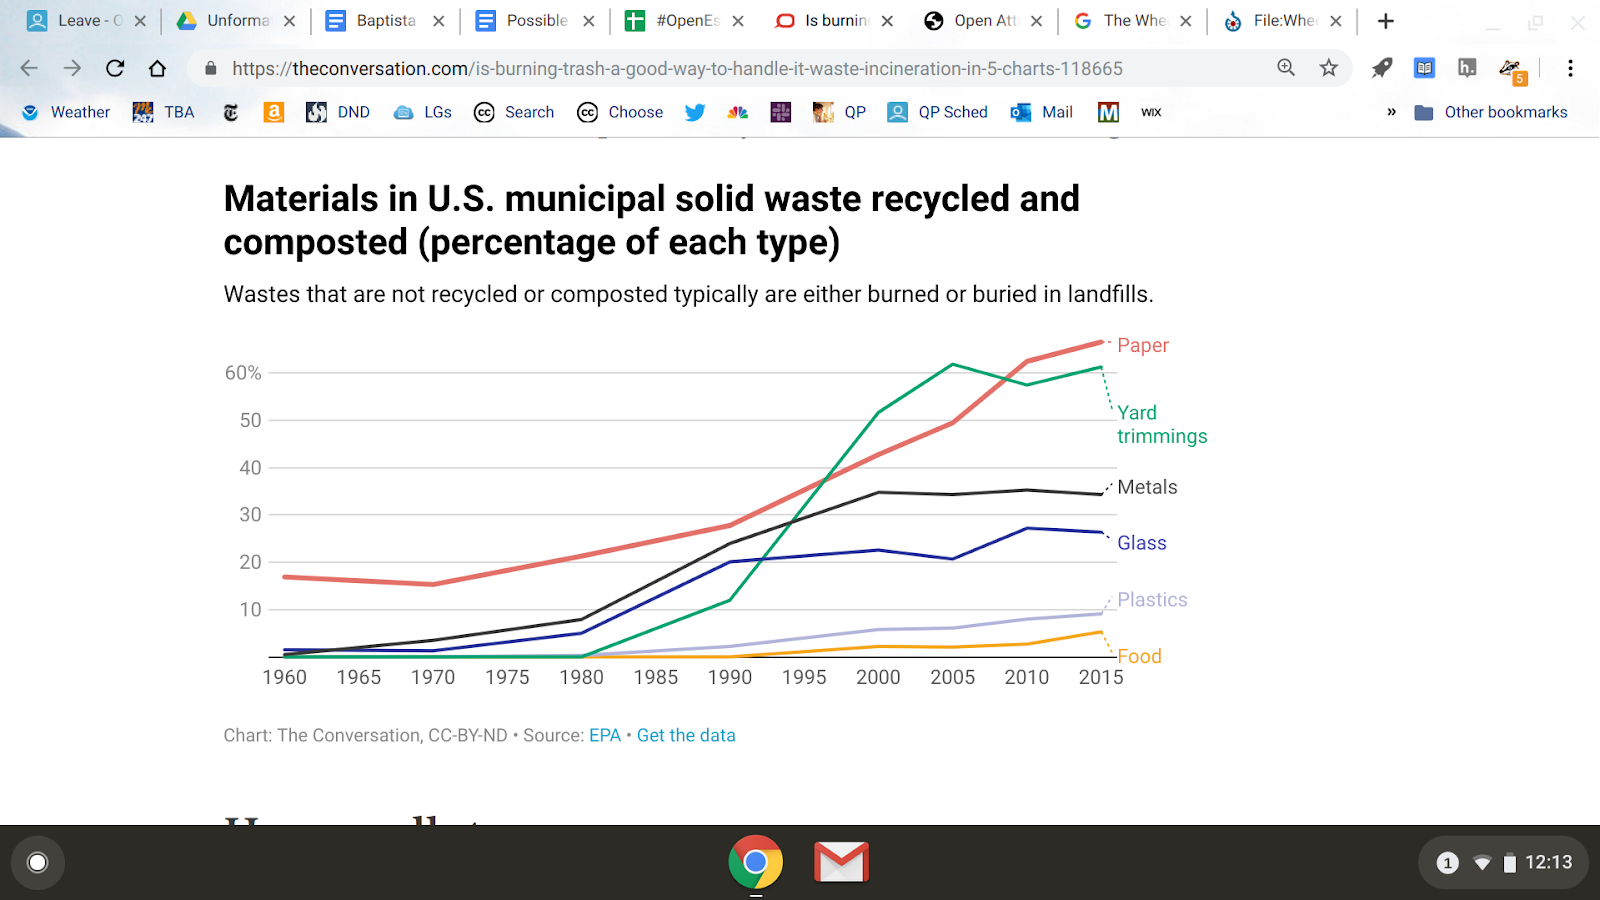 Image of a line graph showing the solid wasted recycled and composted in the U.S.